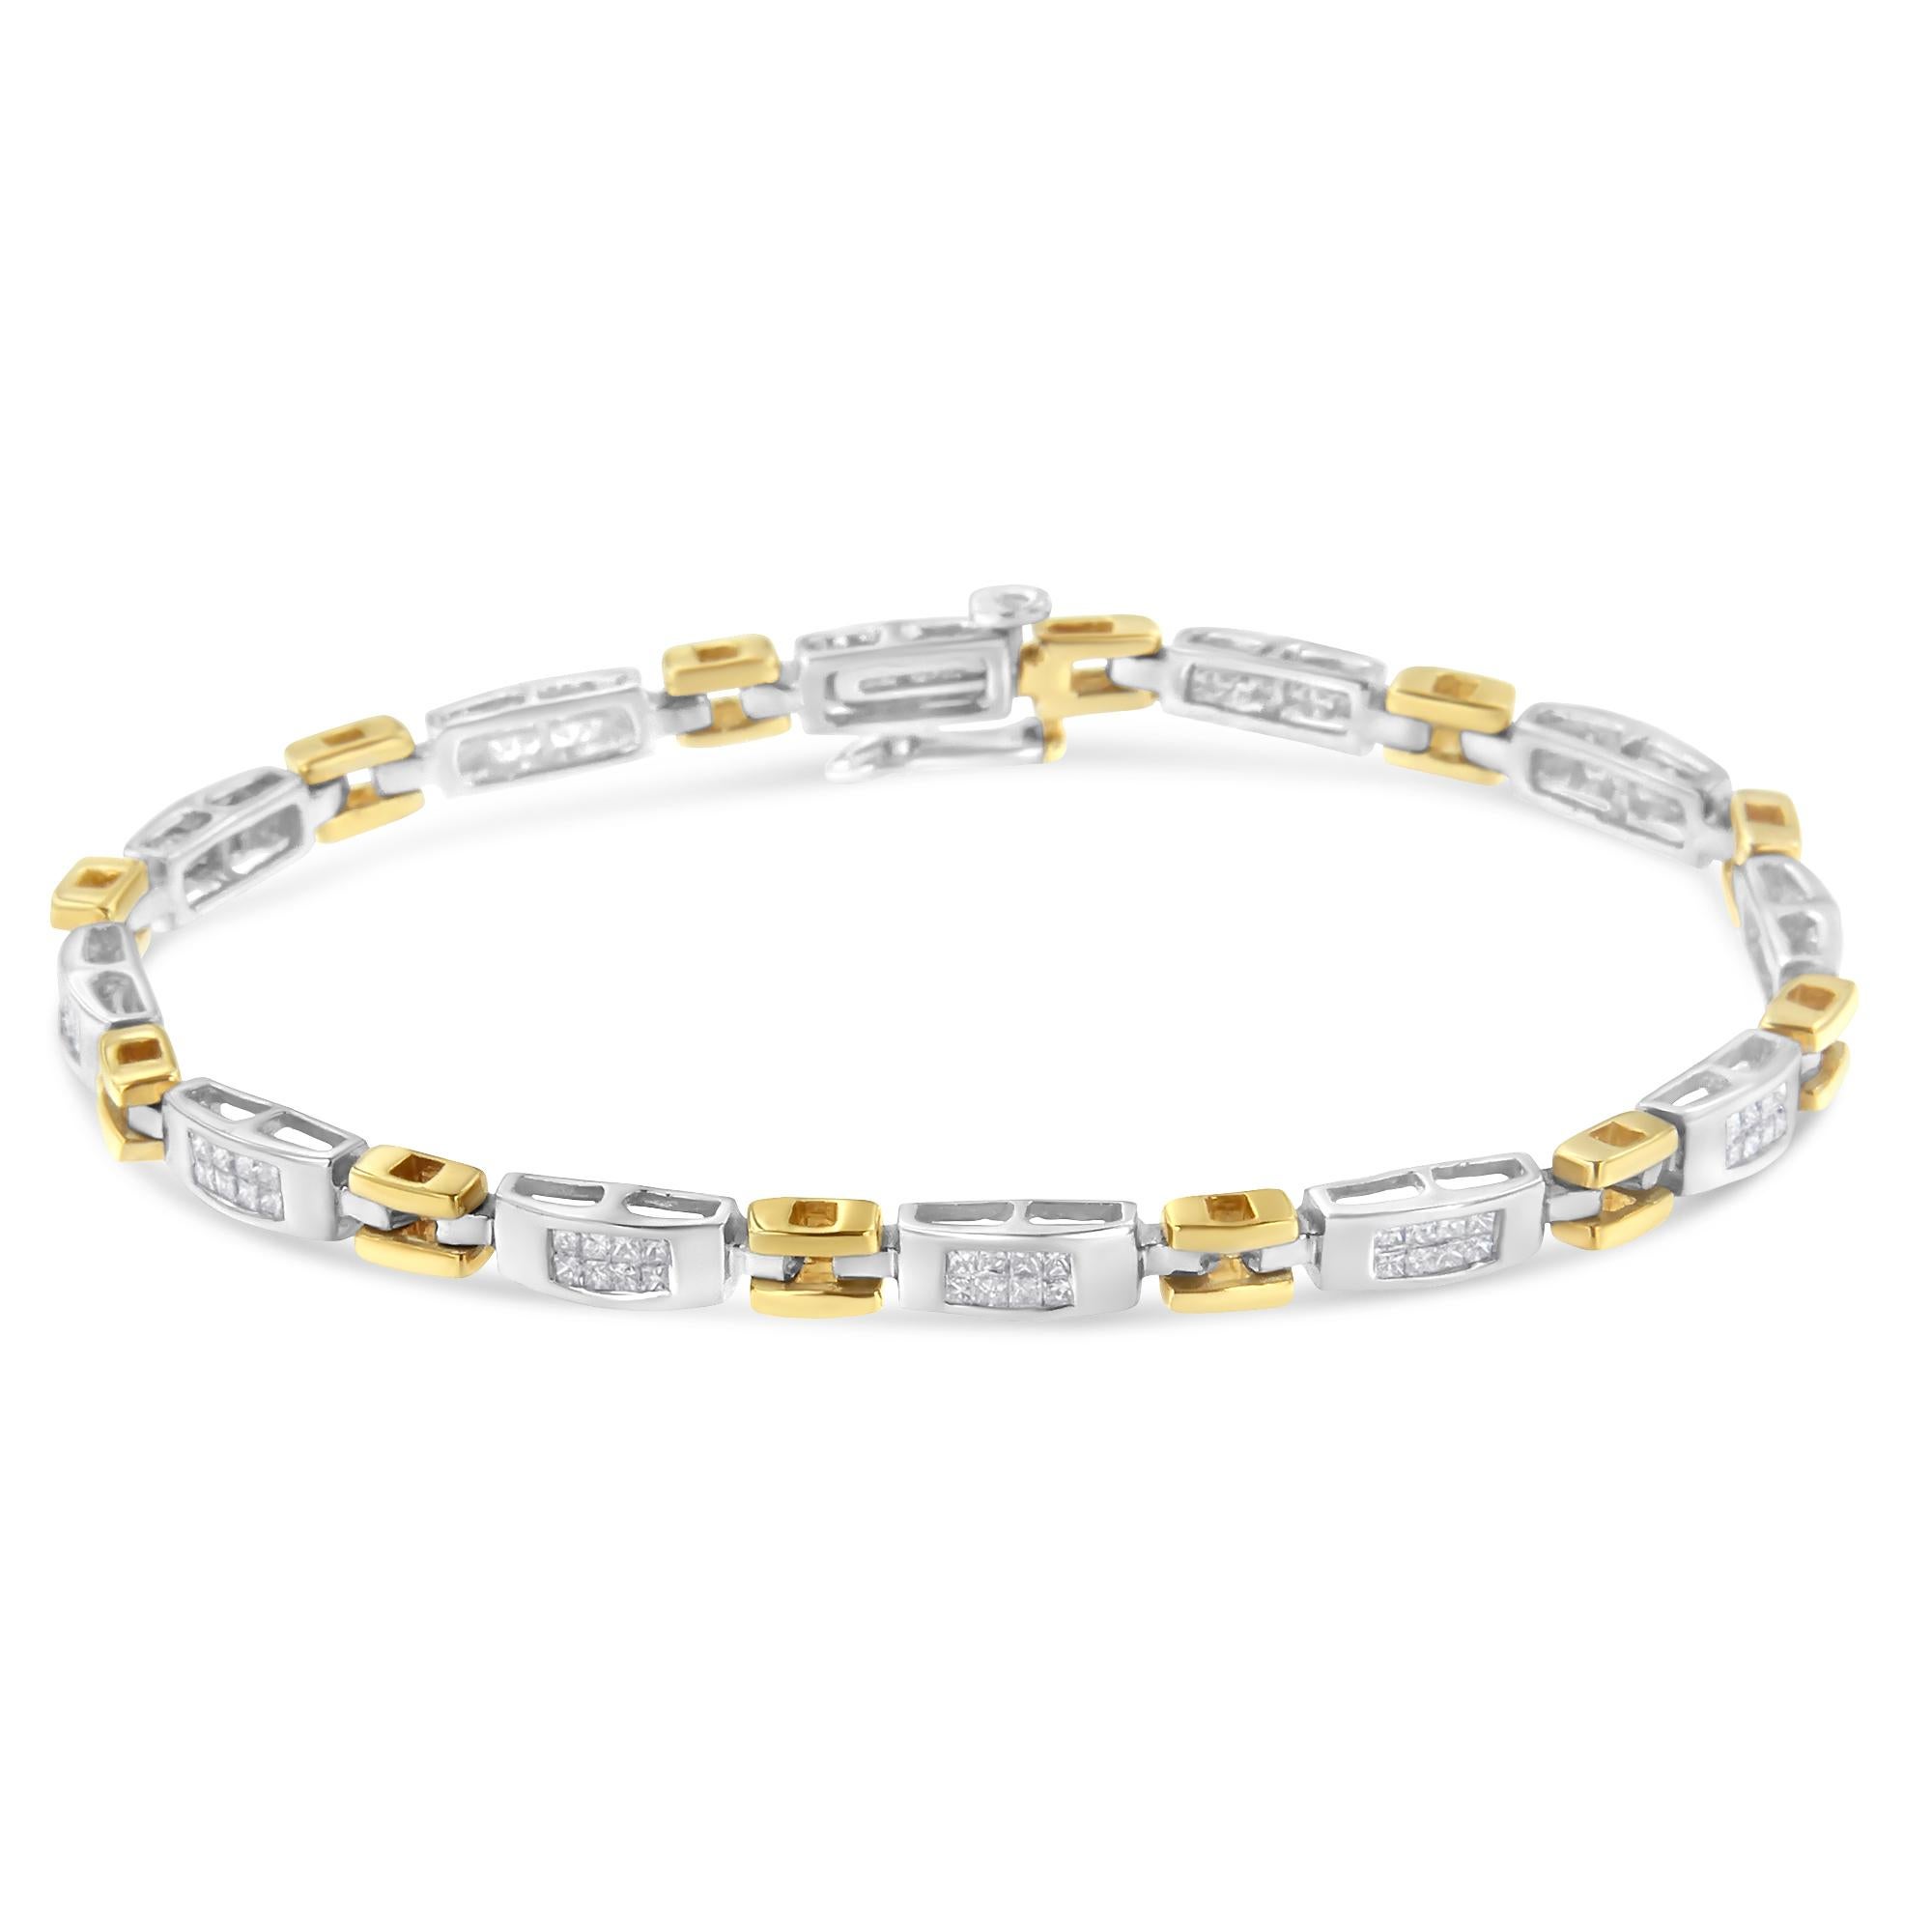 This unique geometric bracelet brings together open yellow gold links with diamond-embellished rectangular bands on a white gold finish. Forming an eye-catching interlocking pattern, each princess cut stone shines bright, creating a one-of-a-kind